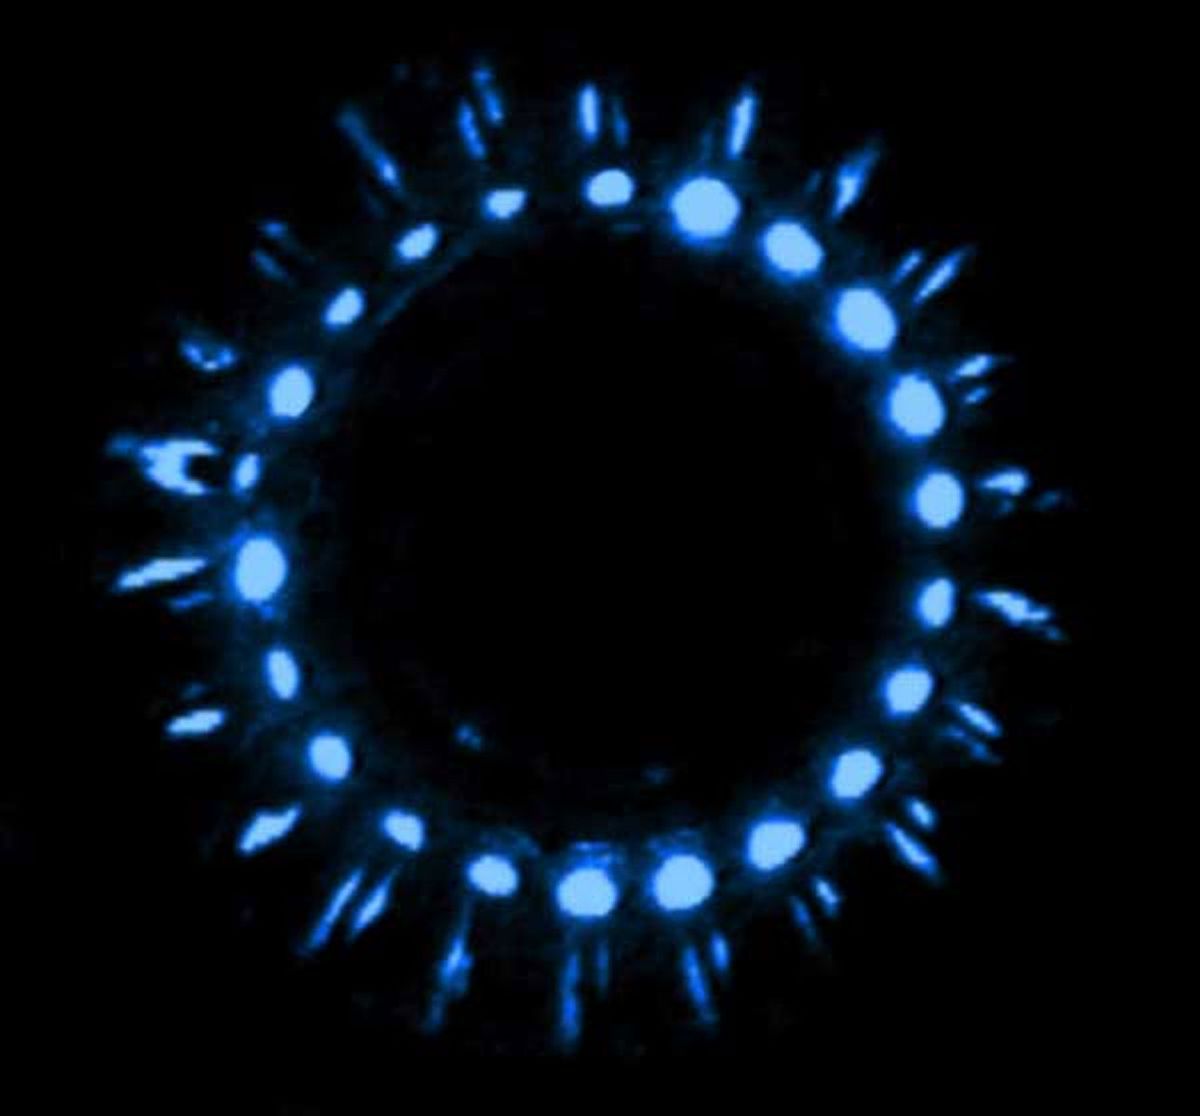 A ring of lights indicating the photophores of a jellyfish.